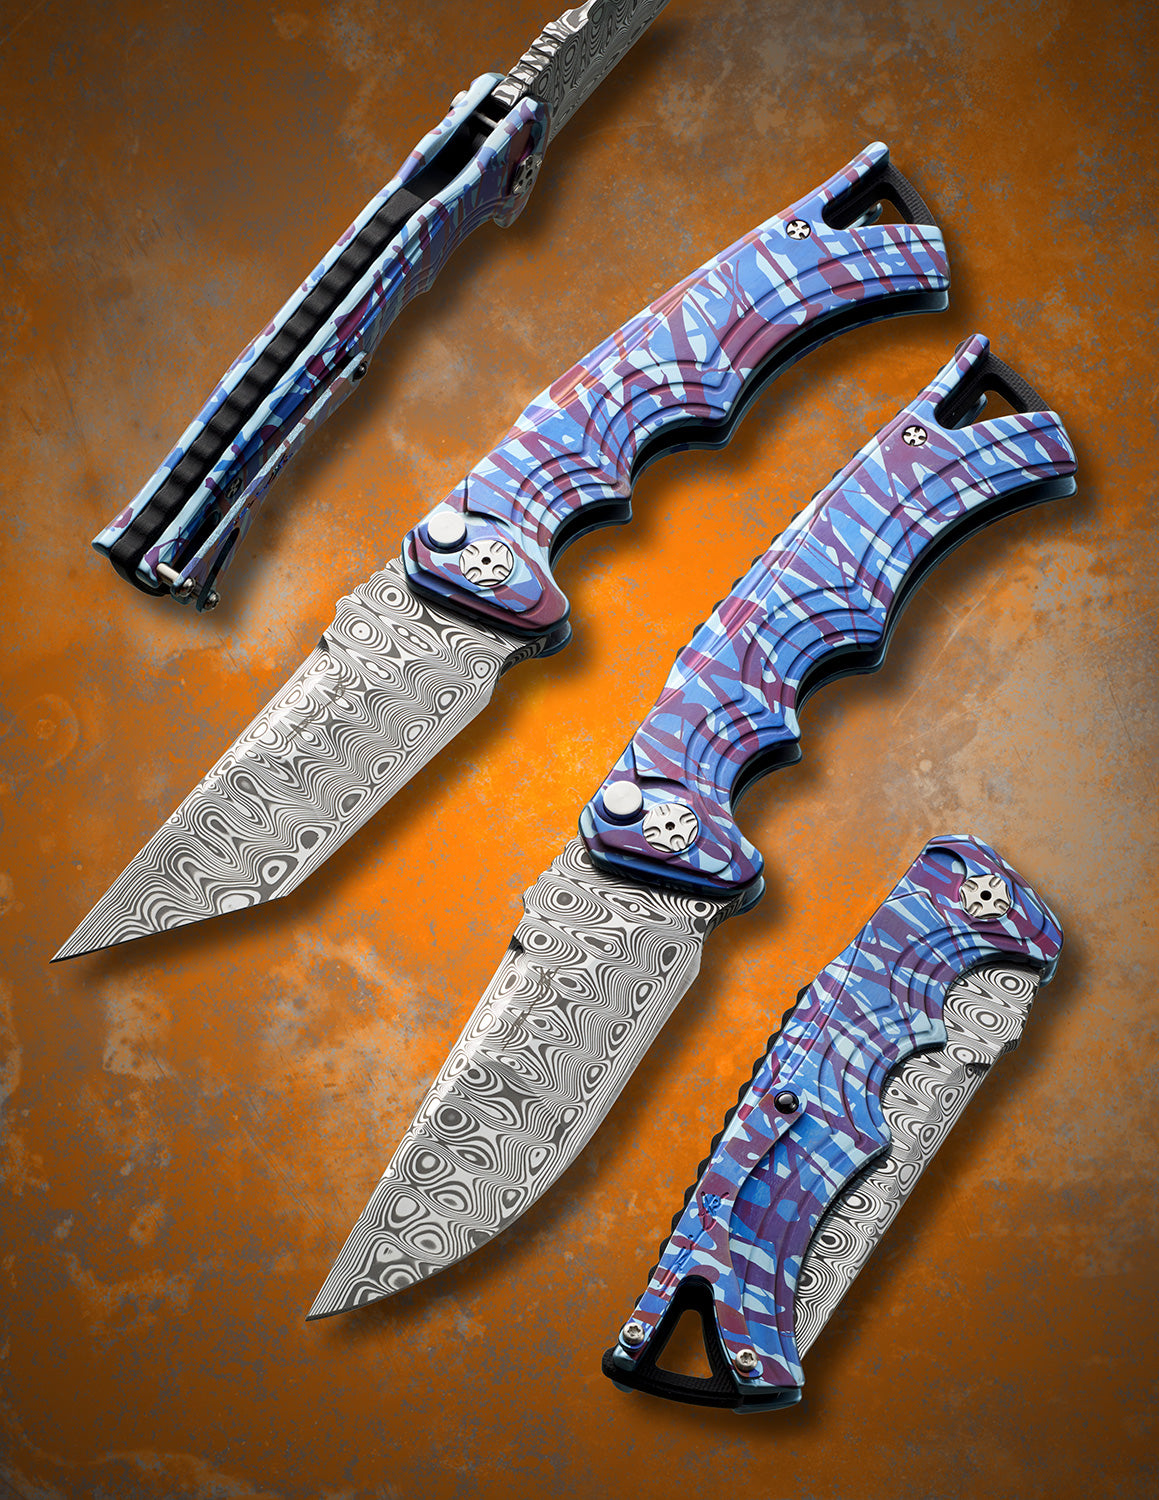 Tighe FIghter with Damasteel Blades and Tighe-ger Striped Titanium Scales